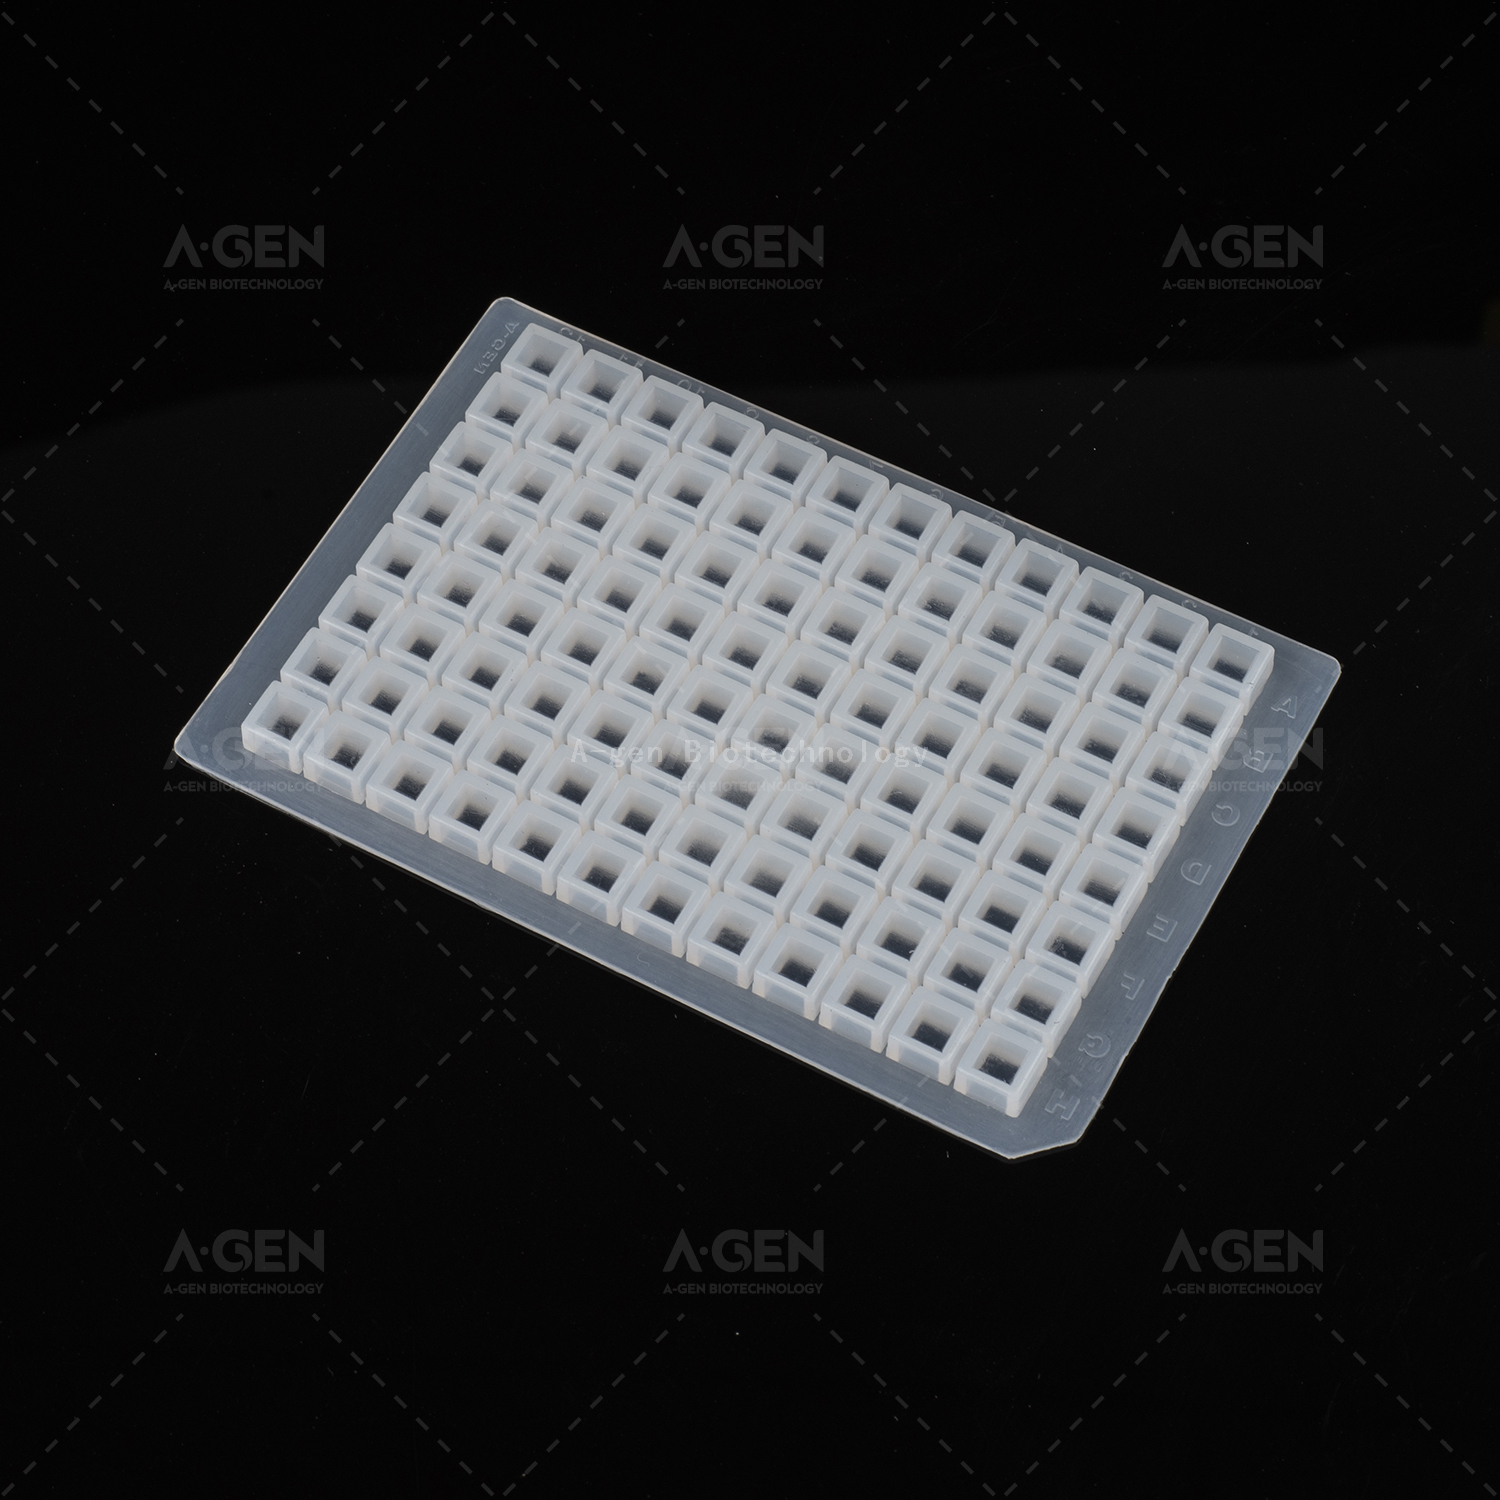  Silicone Sealing Mat for 96 Square Well plate，pierceable